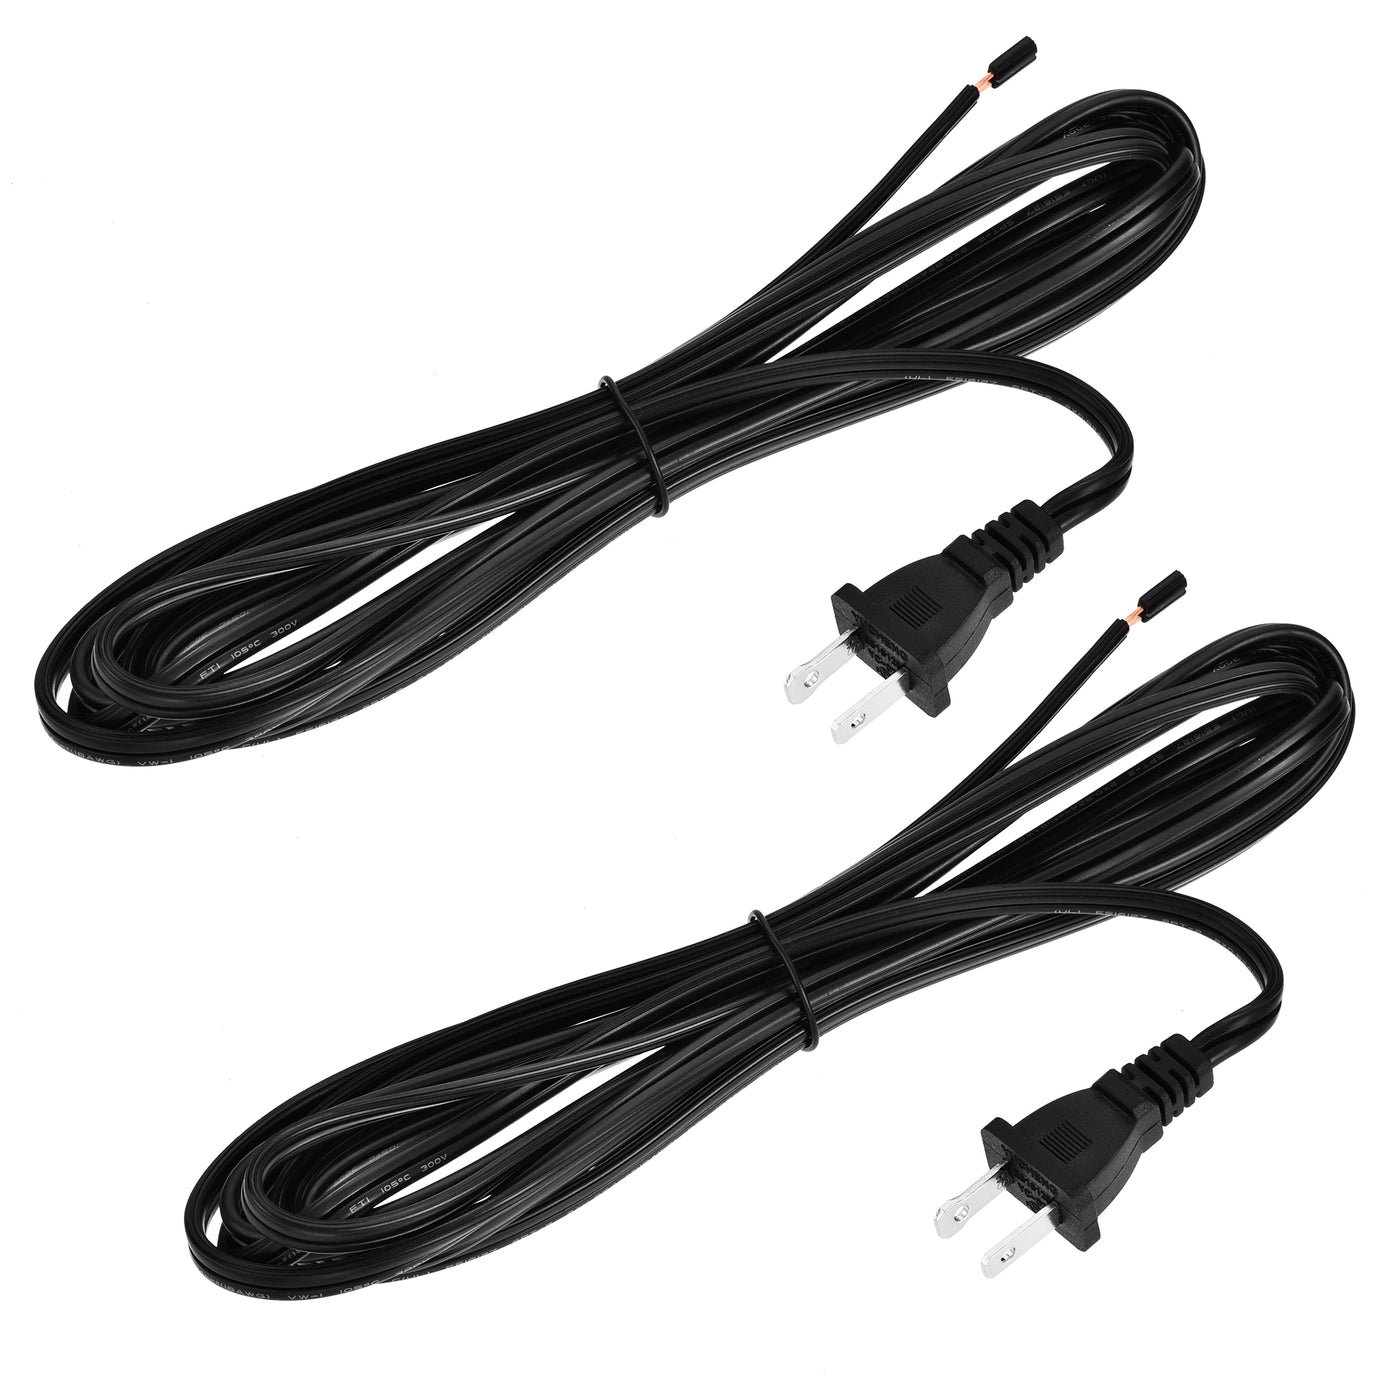 uxcell Uxcell US Plug Lamp Cord, SPT-2 18AWG Power Wire 3.5M Black, Replacement Lamp Repair Part, UL Listed 2Pcs